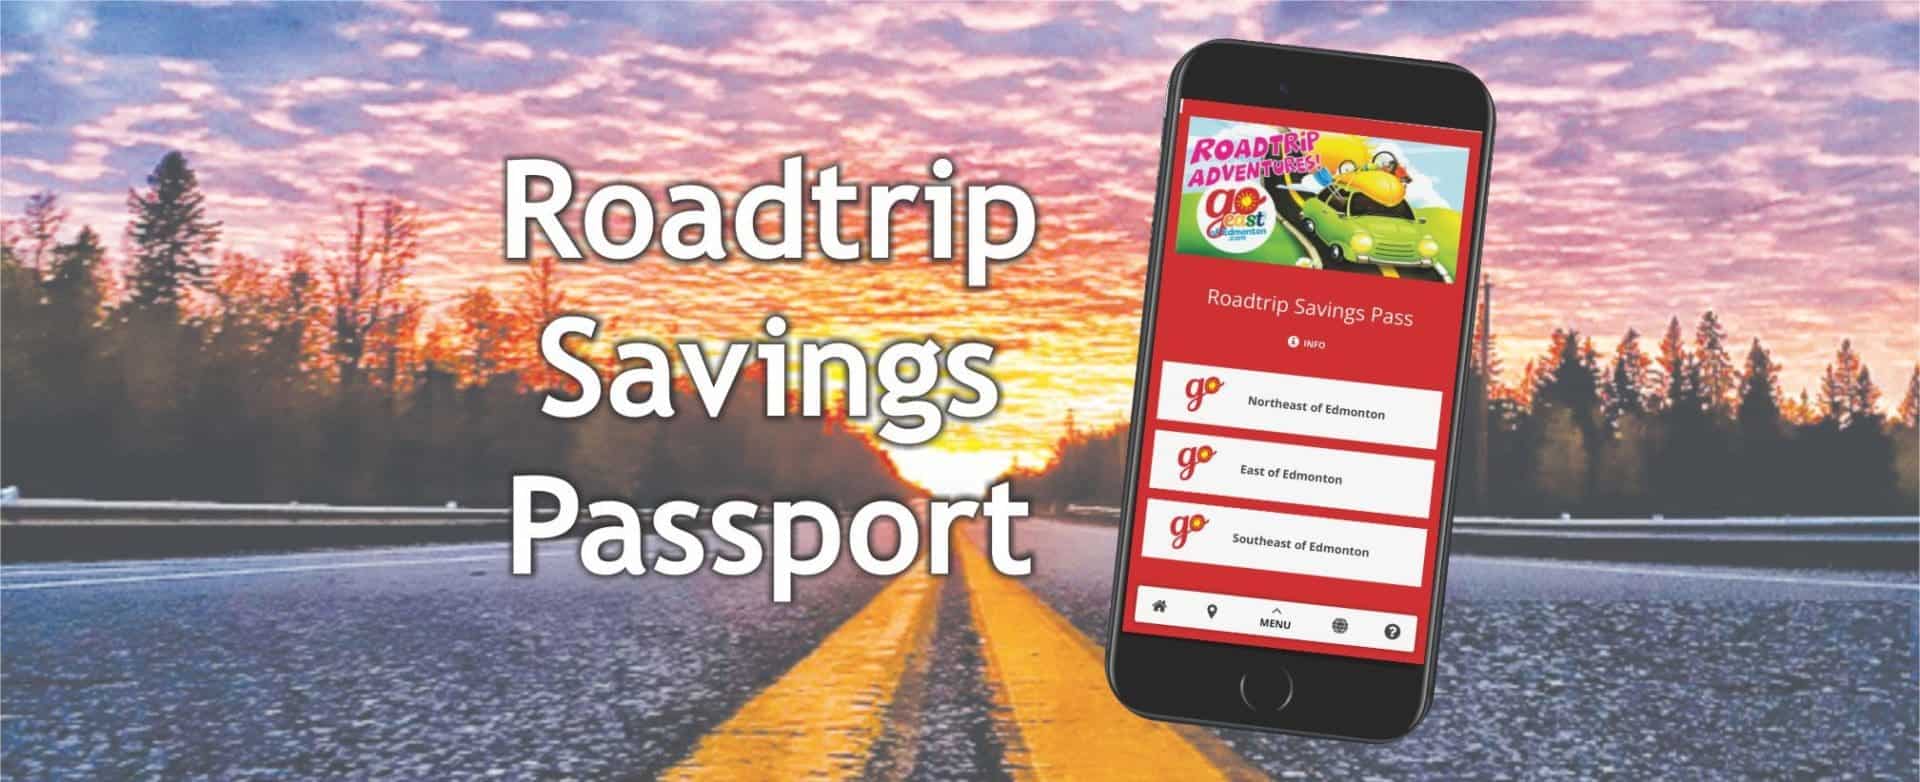 Featured Image for “It’s here! The Roadtrip Savings Passport”